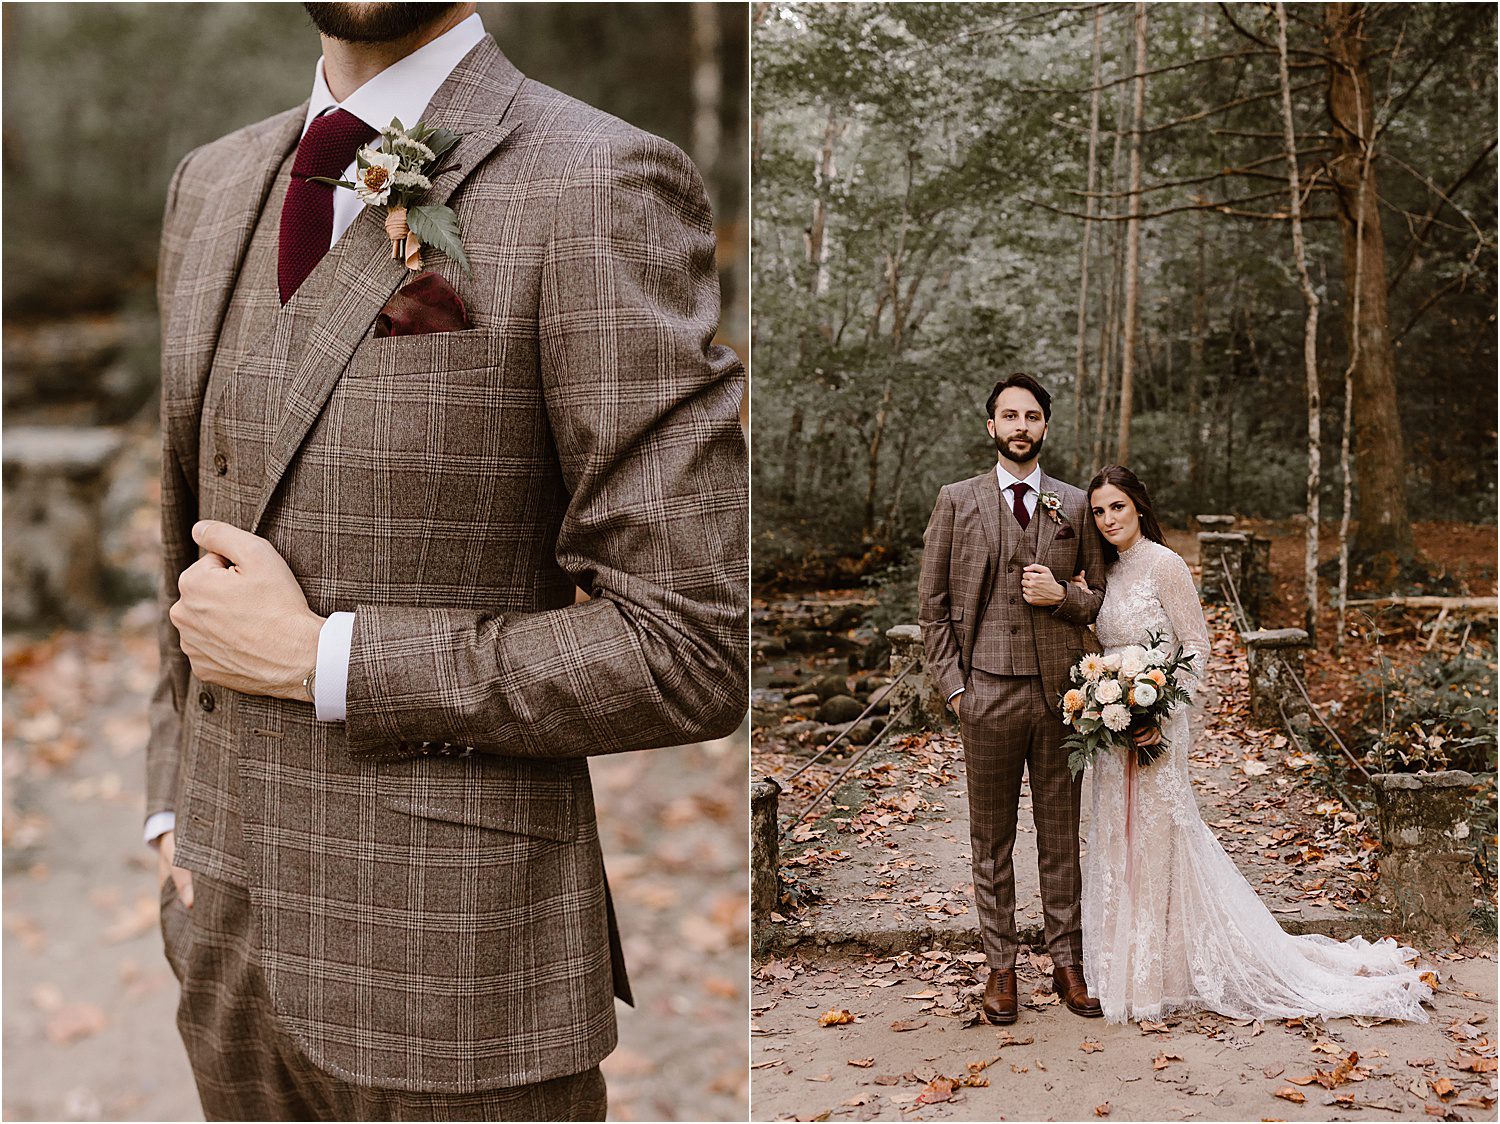 man stands in plaid brown three-piece suit with woman in white wedding dress holding bouquet